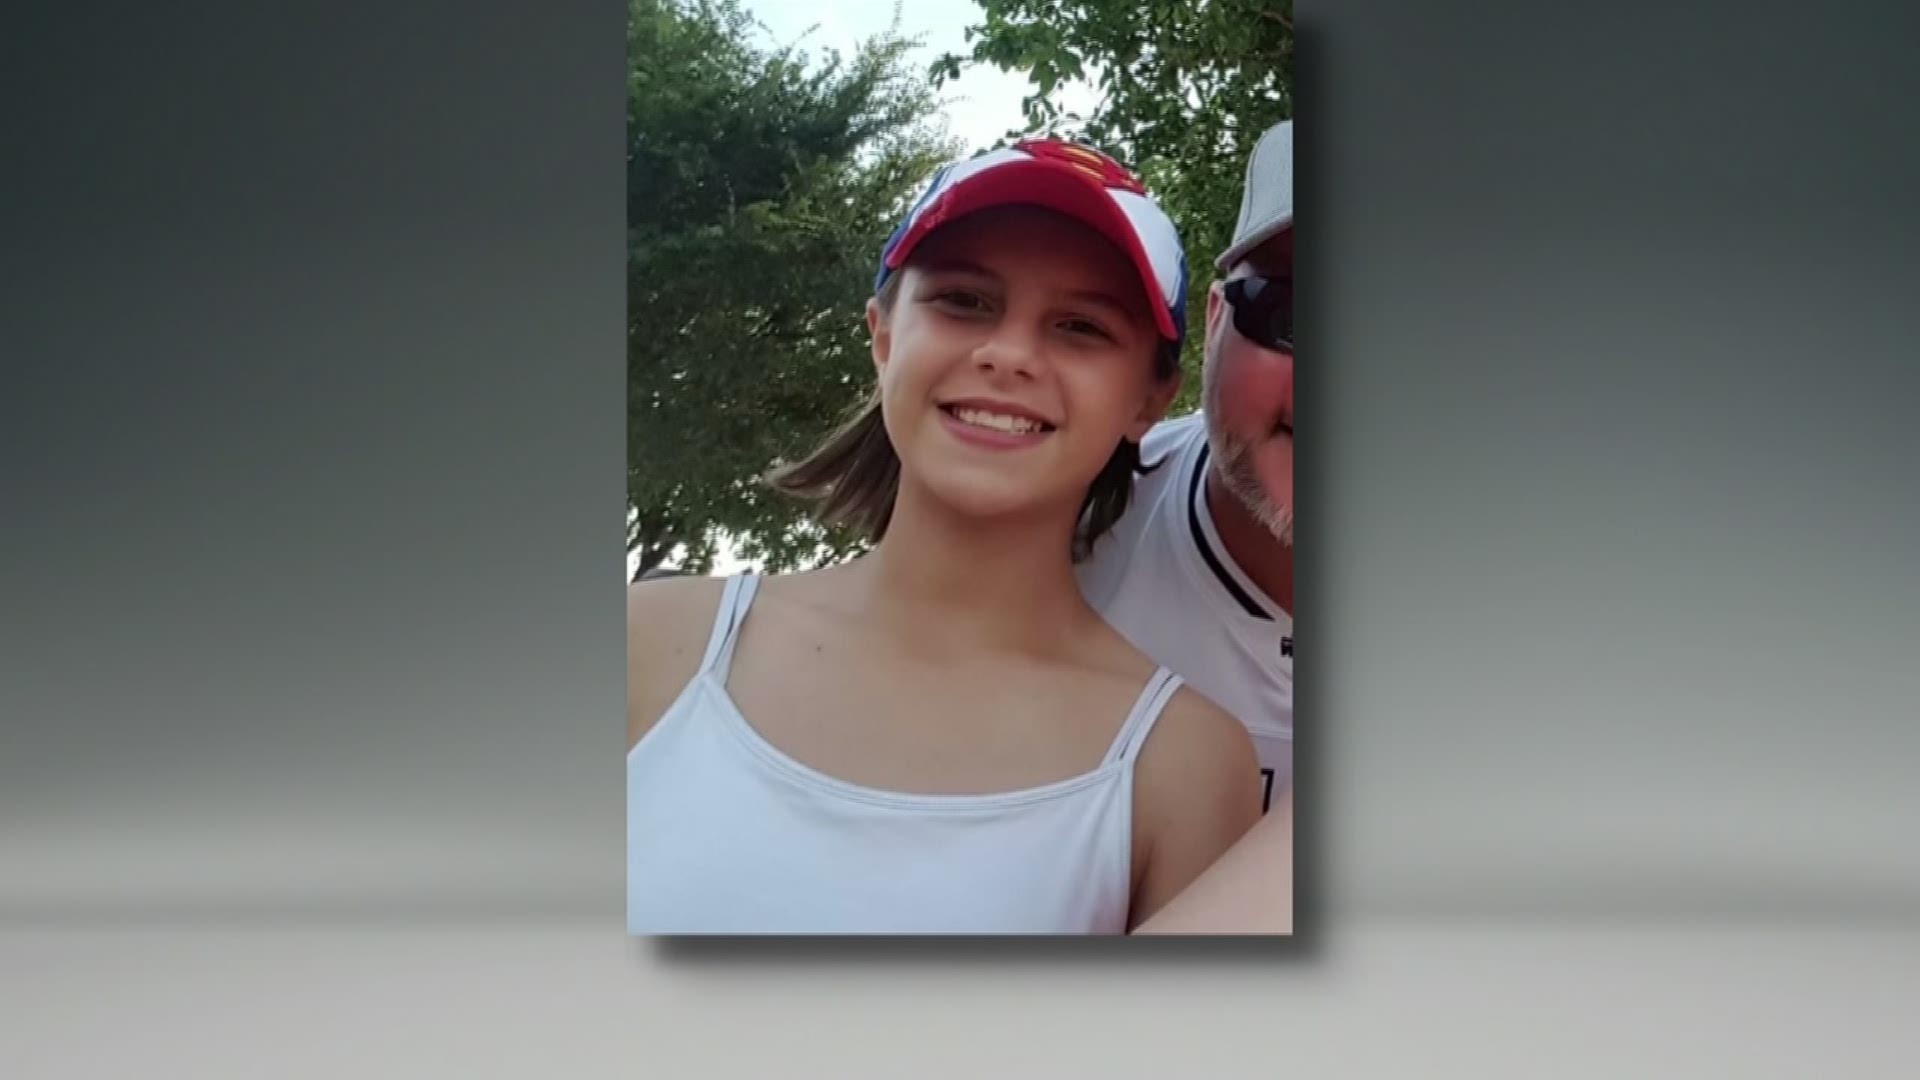 Body found in landfill identified as missing Bedford teen